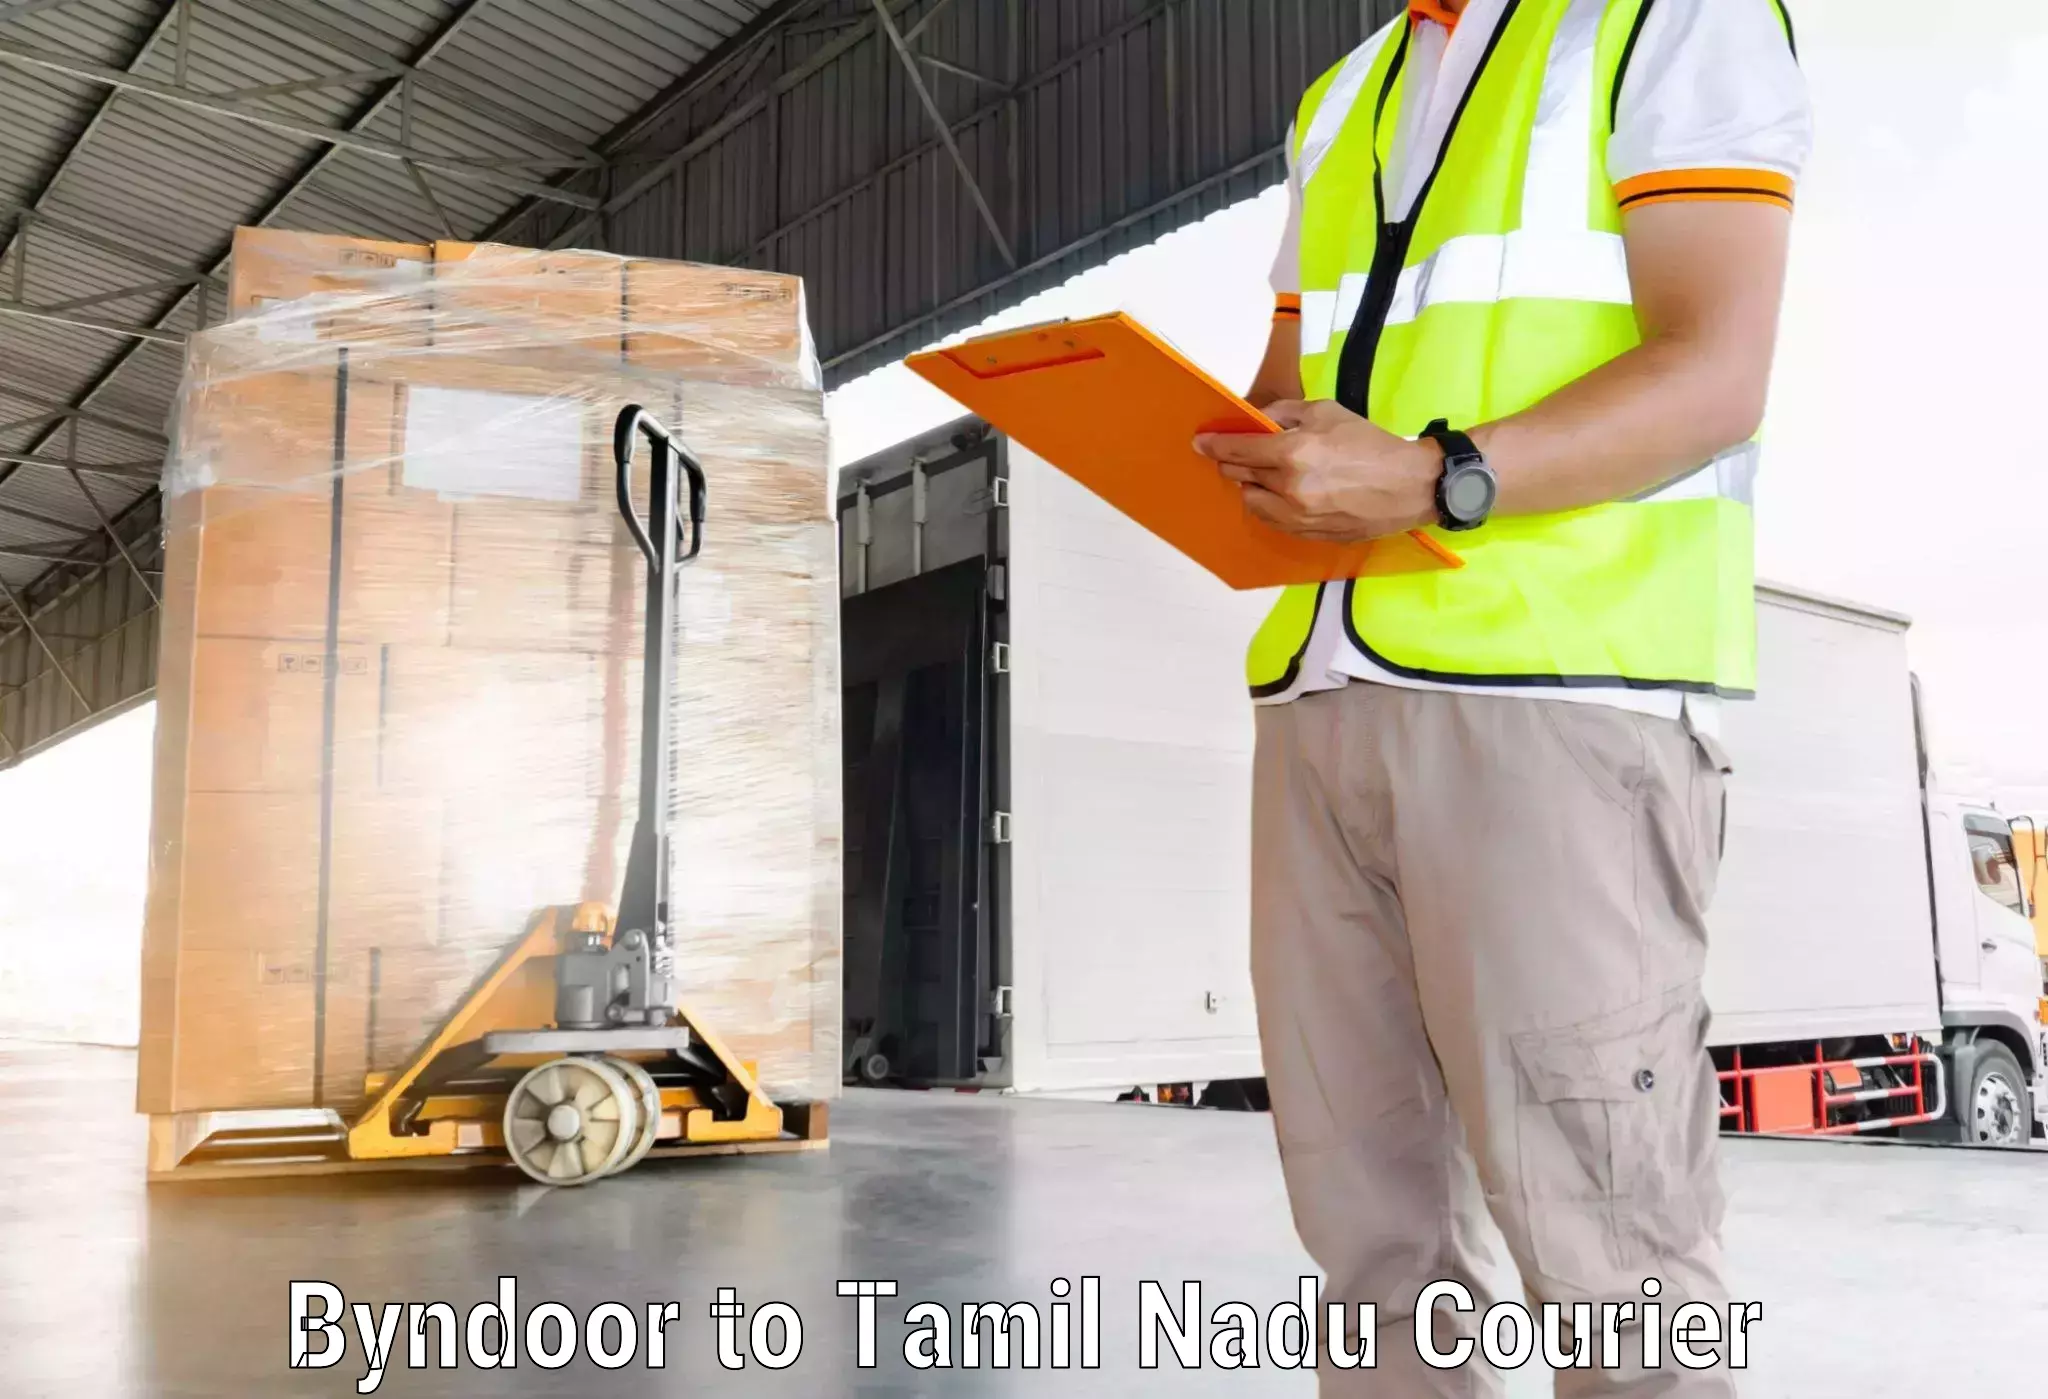 Courier service efficiency Byndoor to Vellore